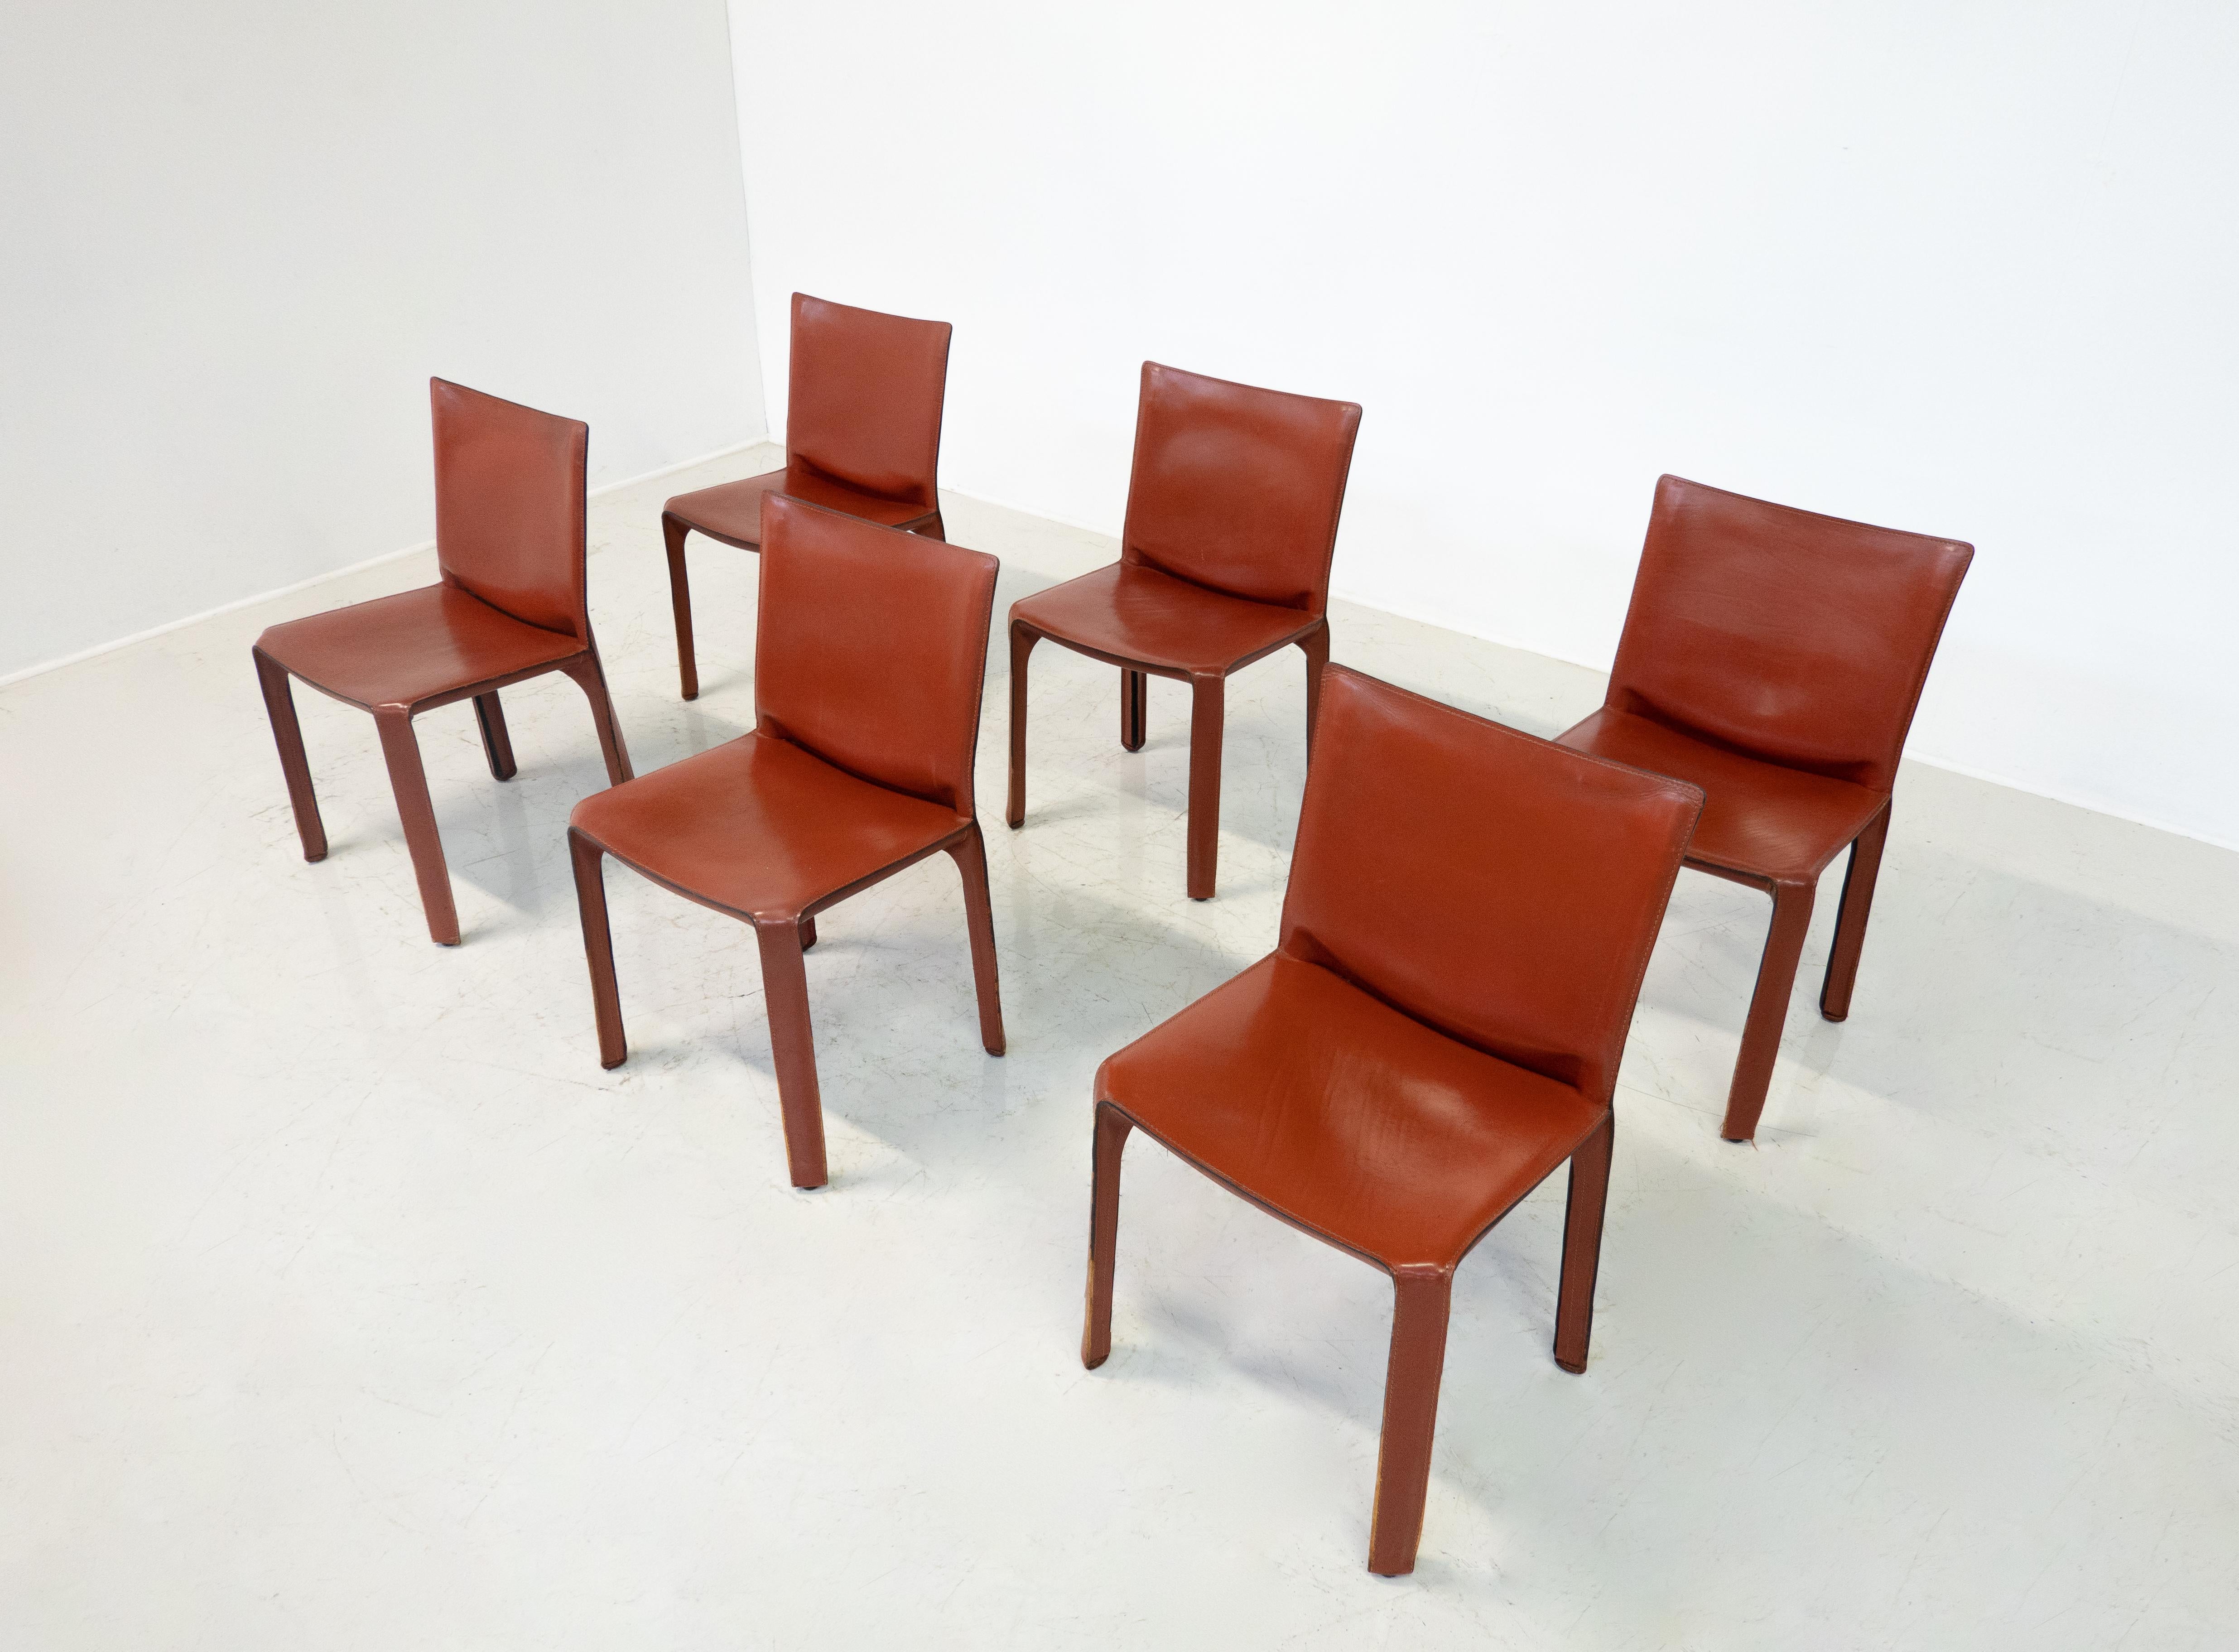 Late 20th Century Mid-Century Modern Set of 6 Chairs Model CAB 412 by Mario Bellini for Casina For Sale